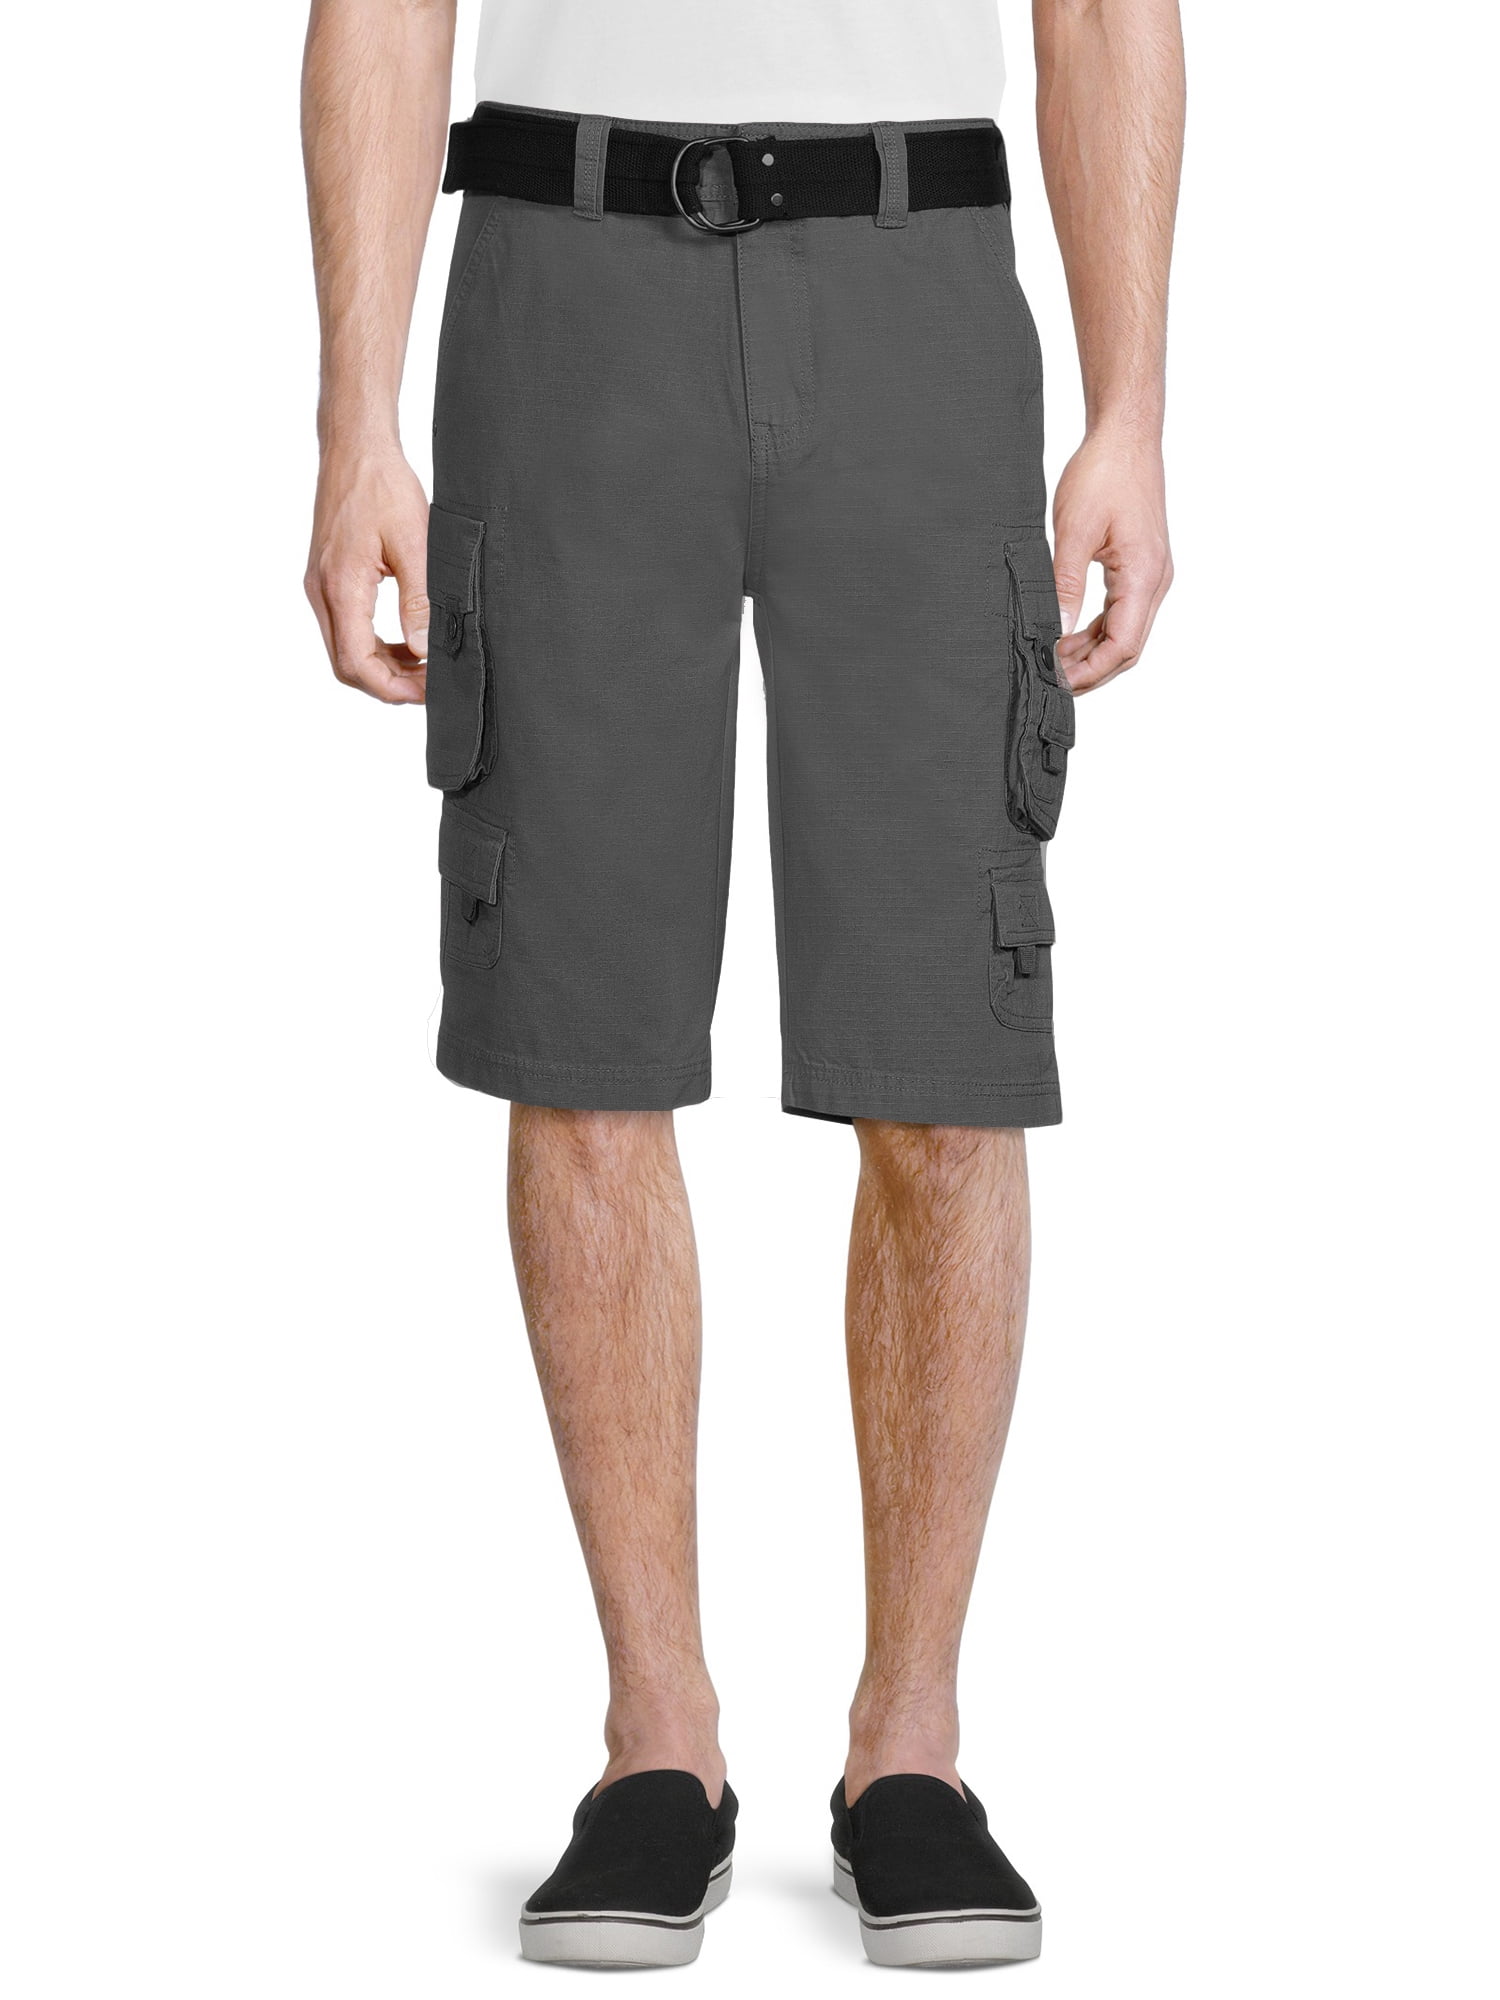 Lazer Mens Belted Ripstop Stacked Cargo Shorts, Waist Sizes 29